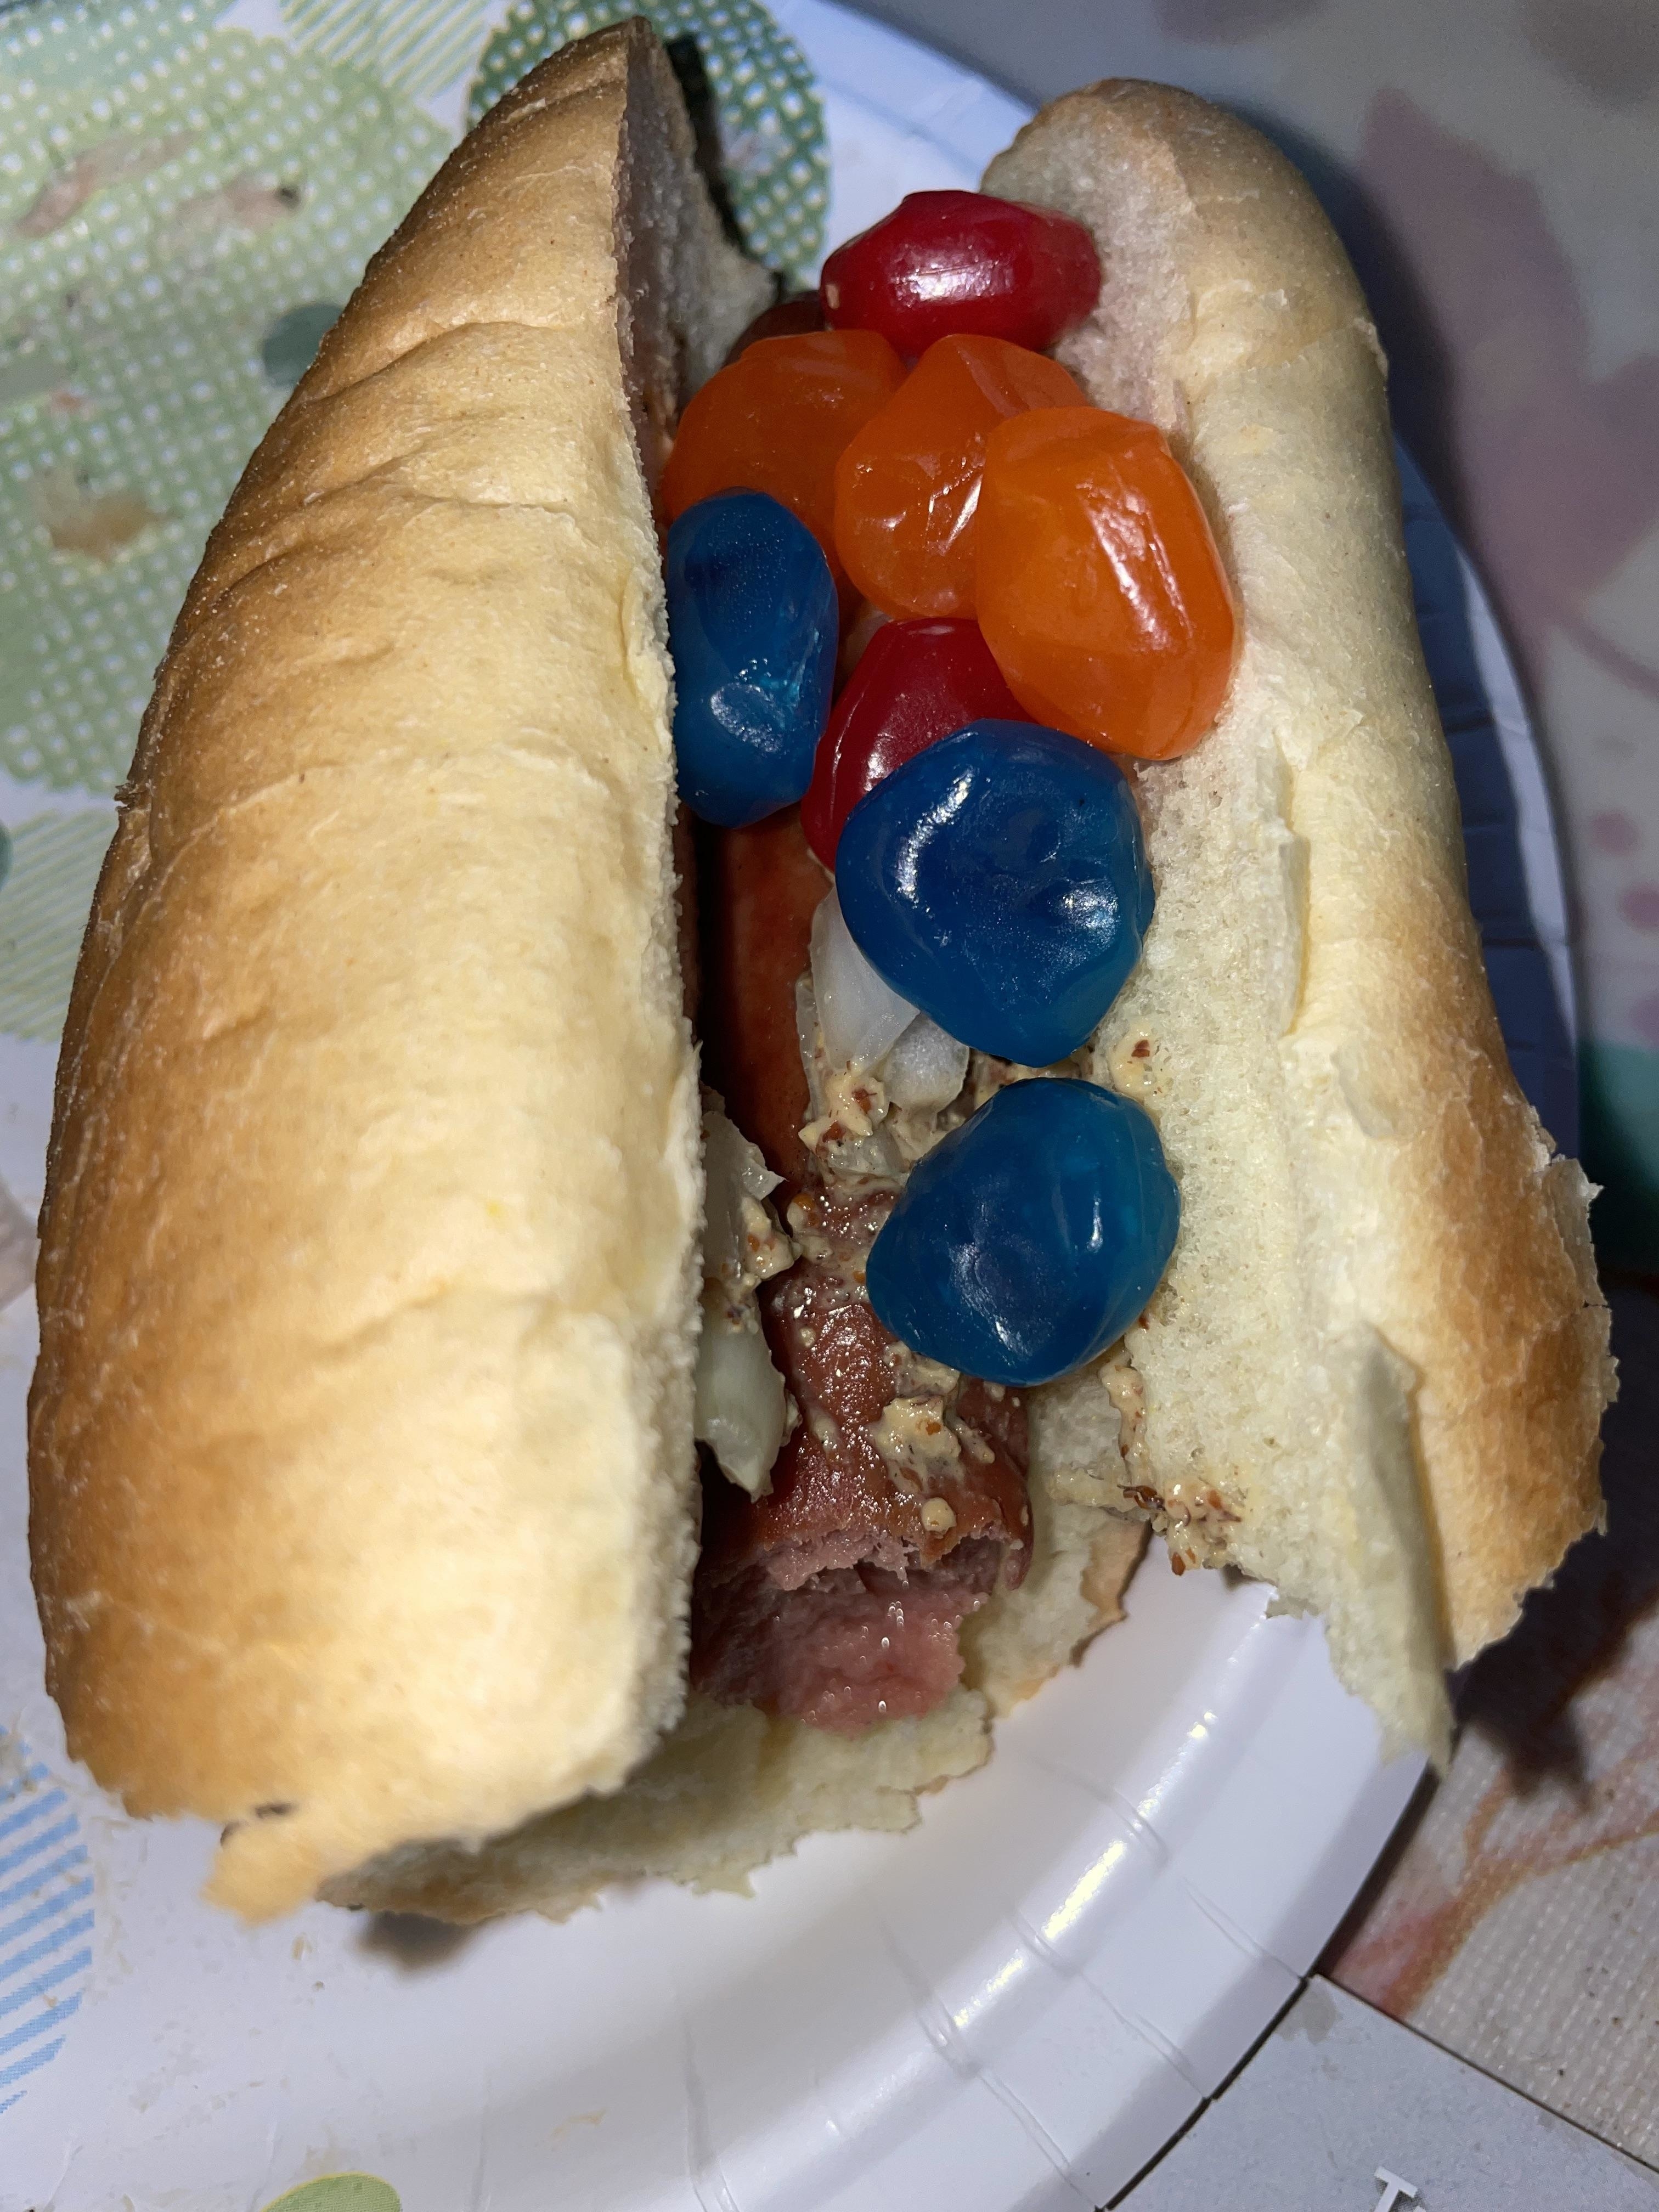 A half eaten hot dog with half a dozen gushers candies on it